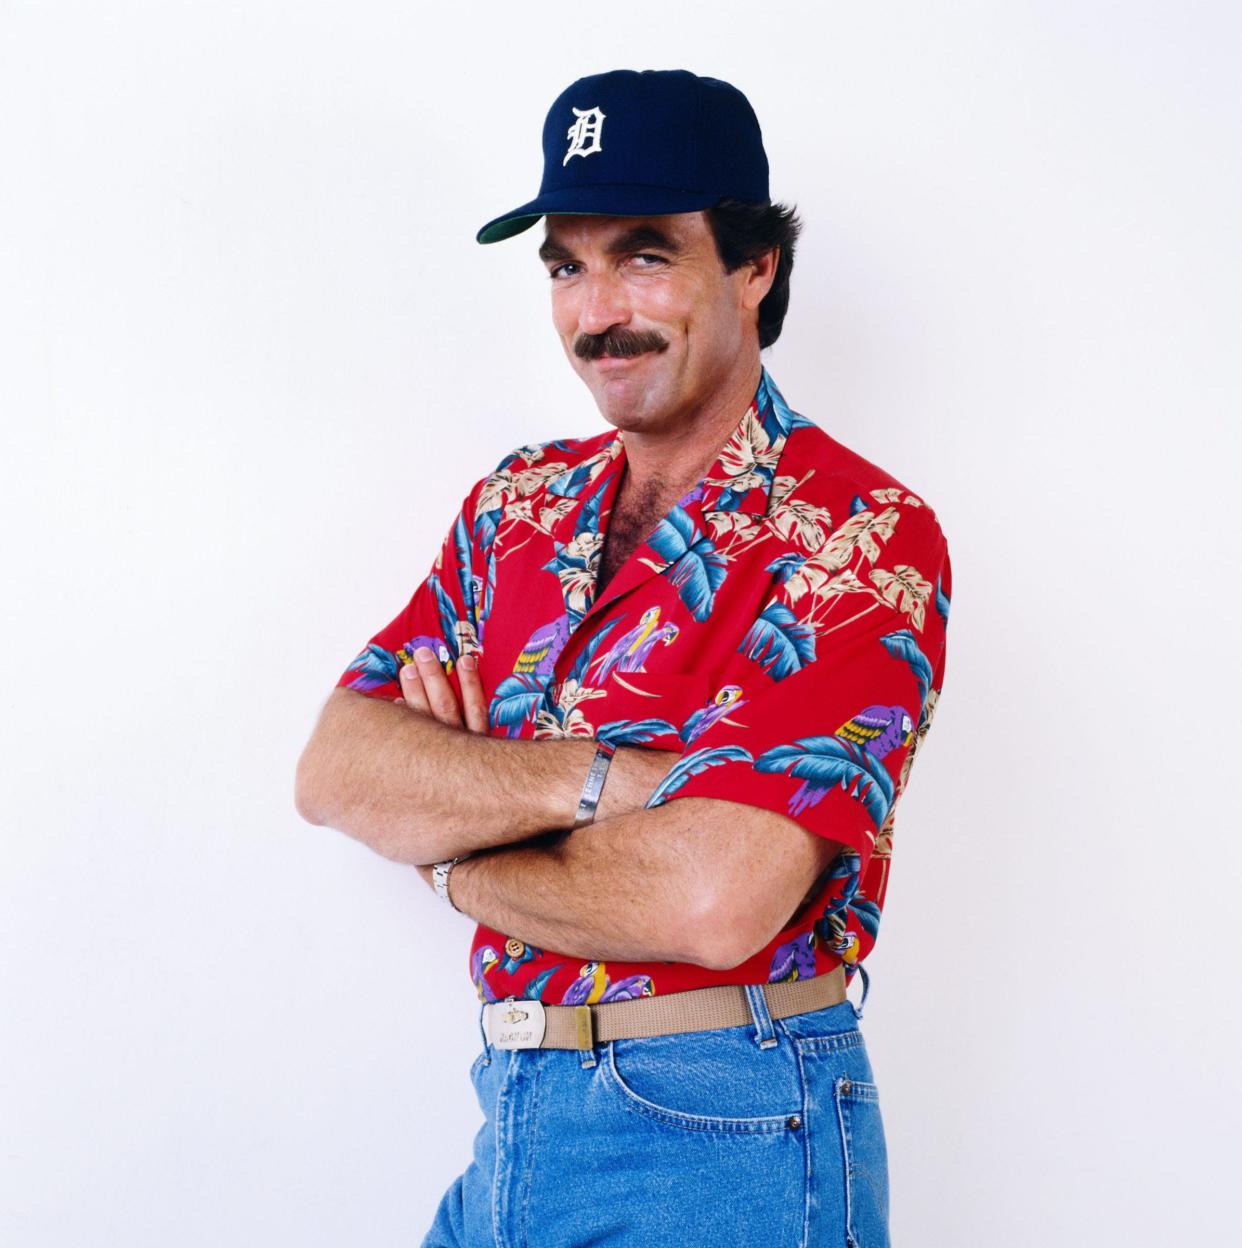 Tom Selleck in costume for Magnum, P.I.